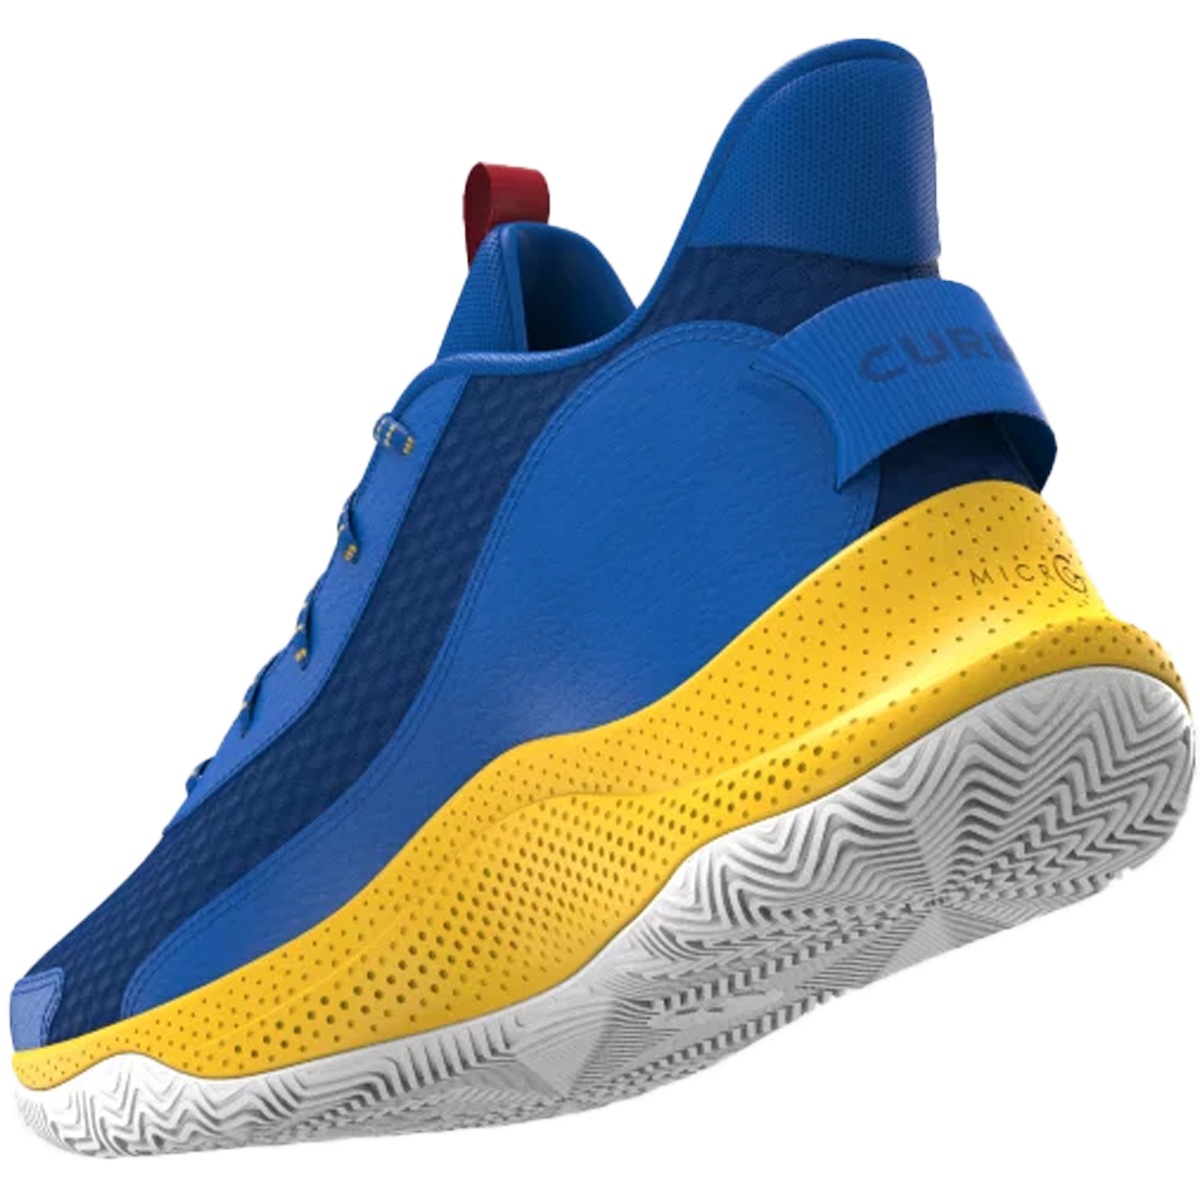 Buy Under Armour Curry 3Z7 Kids' Grade School Basketball Shoes